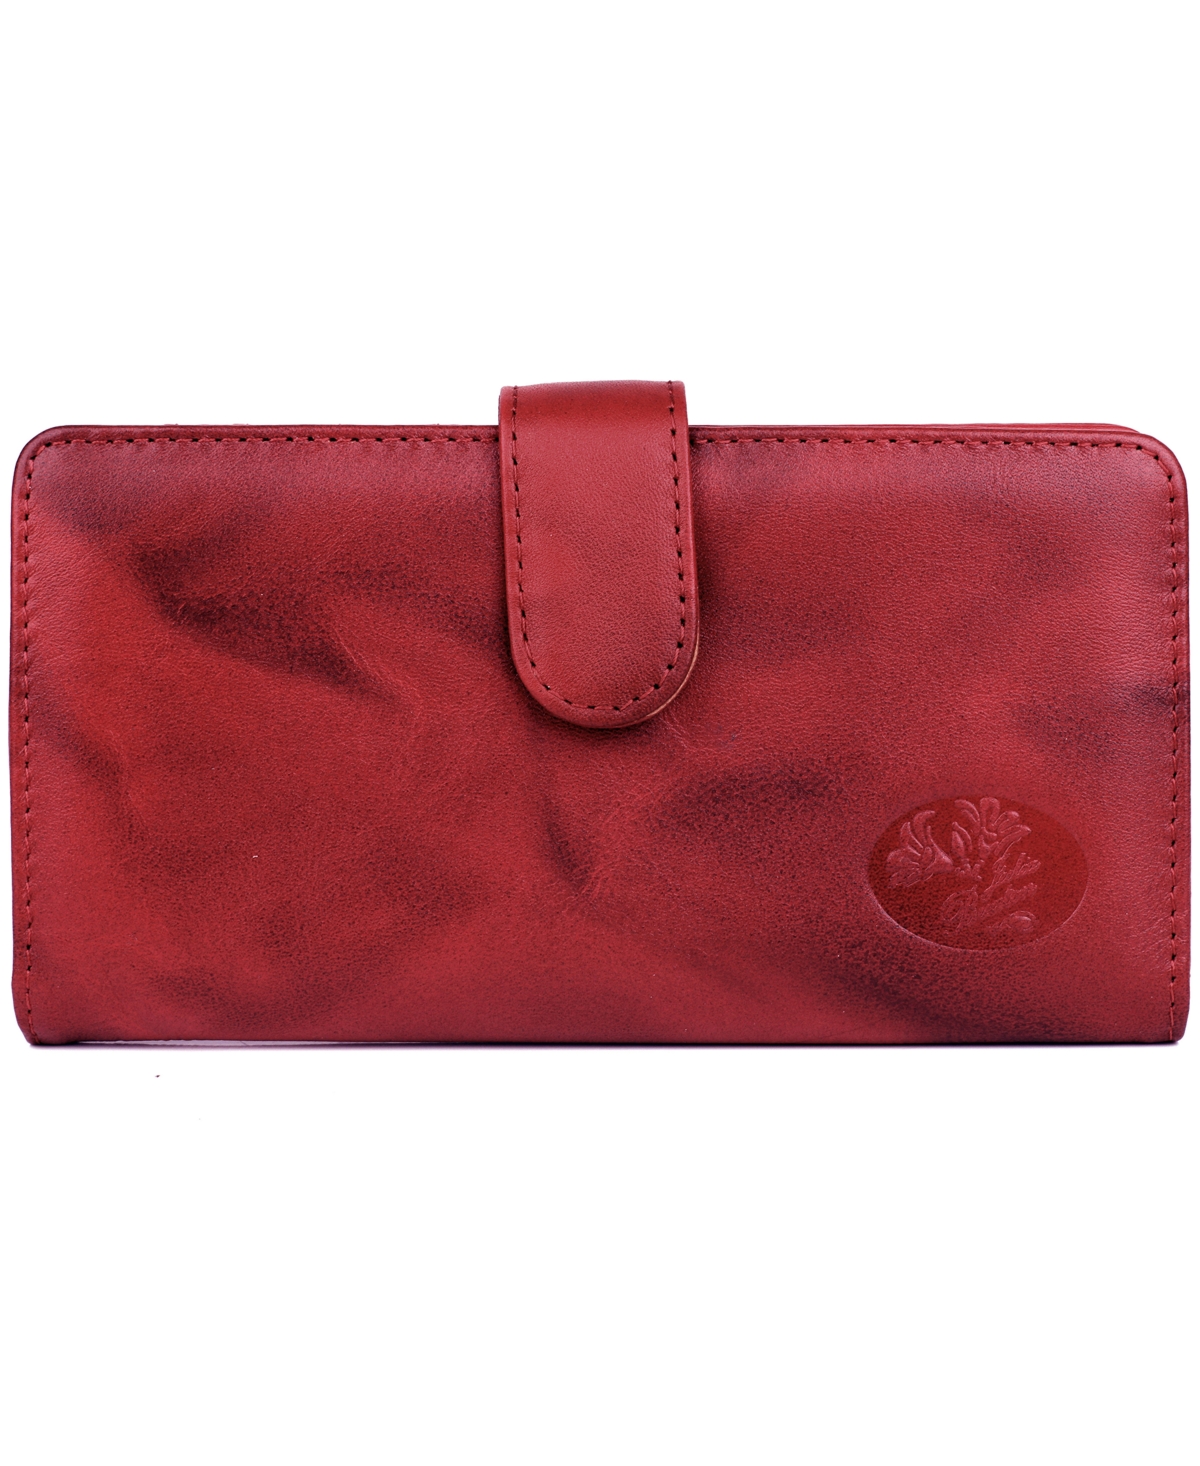 Julia Buxton Women's Heiress Pik-me-up Checkbook Keeper Wallet In Red